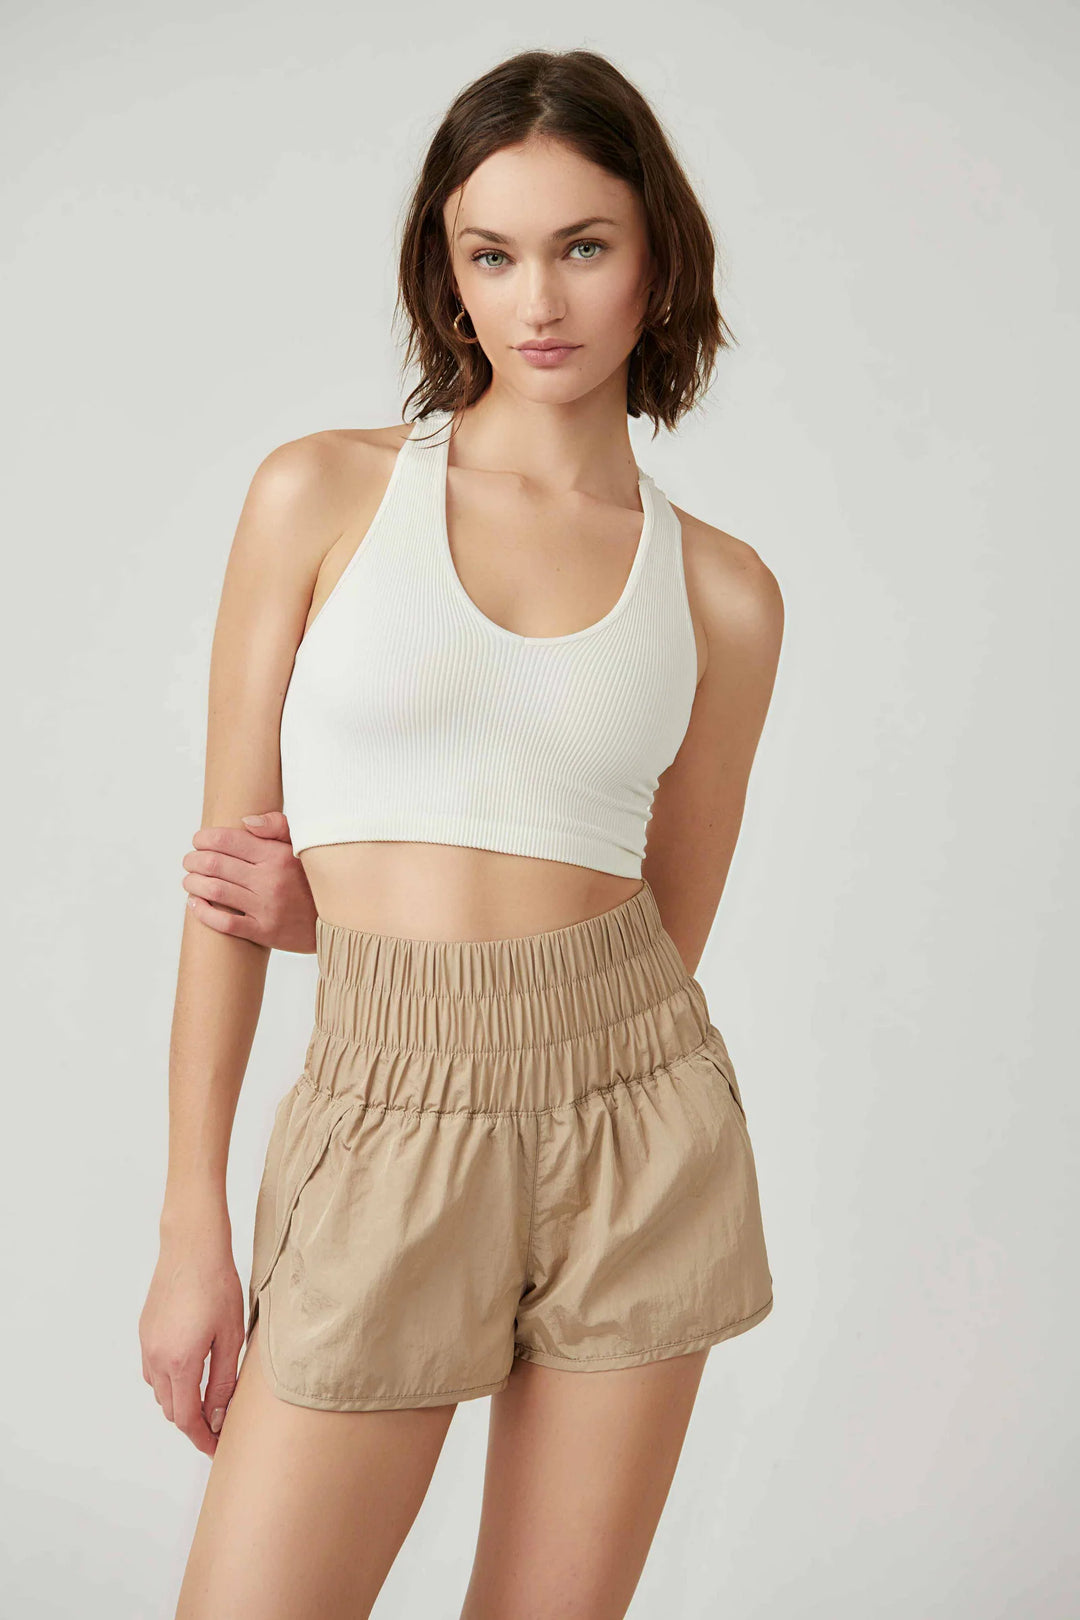 Free People The Way Home Shorts - Clay - Sun Diego Boardshop